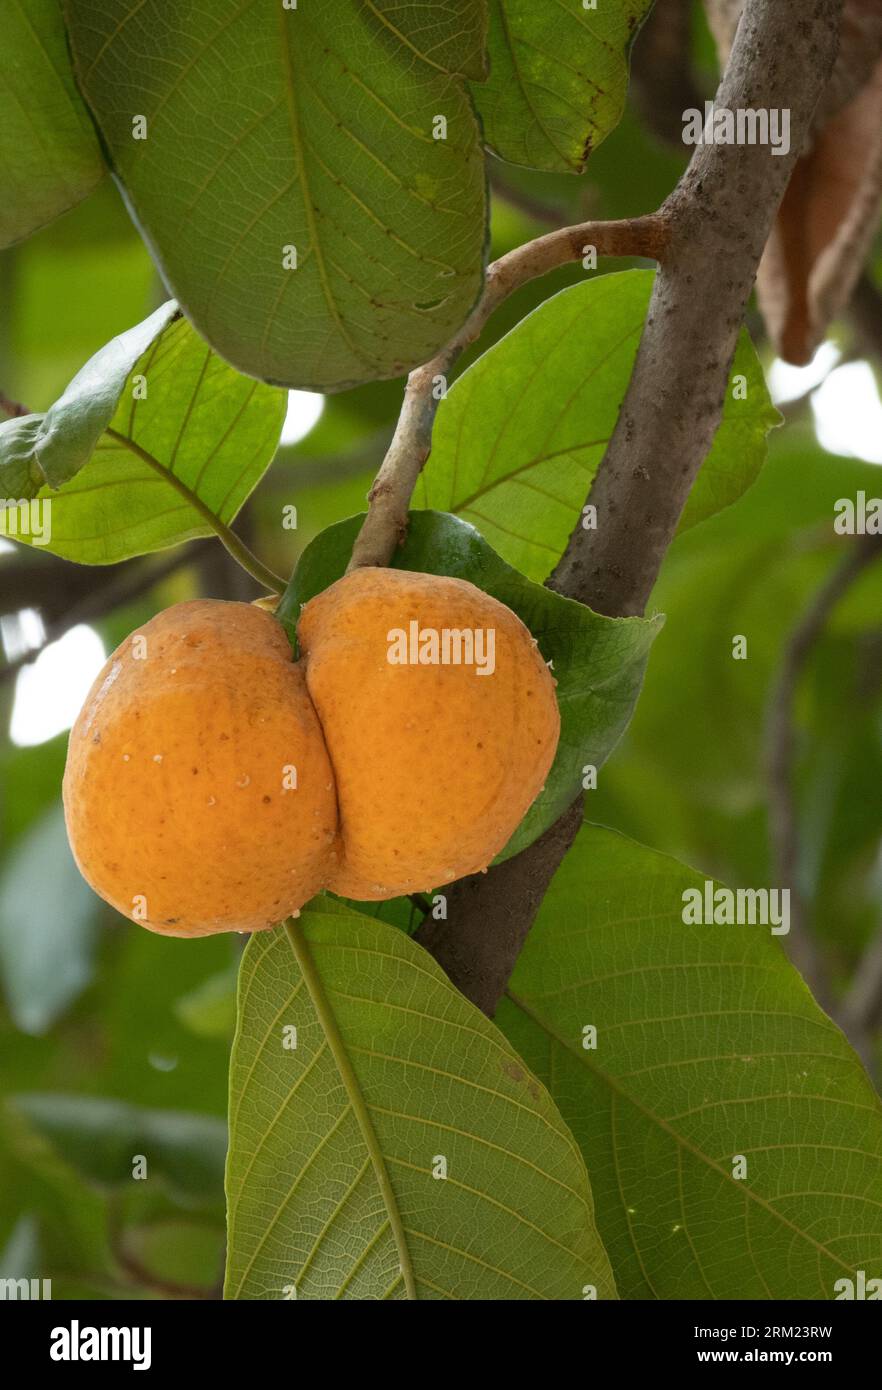 Artocarpus lacucha, also known as monkey jack or monkey fruit, is a tropical evergreen tree species of the family Moraceae. Stock Photo